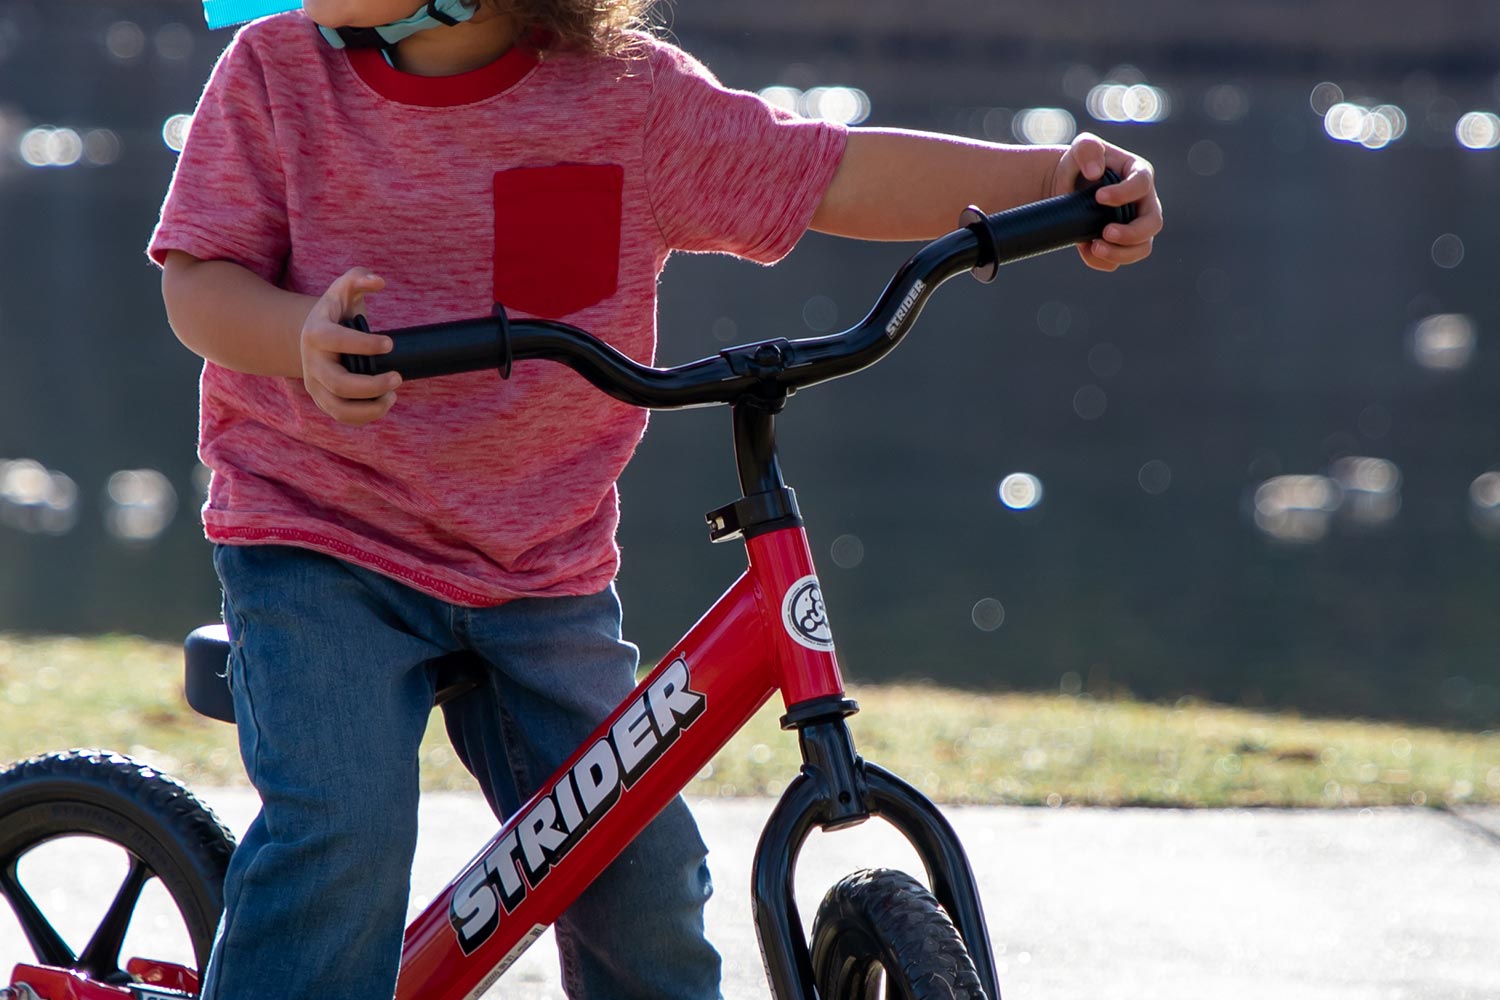 Close up photo of a Strider Standard Stem in use on a red balance bike